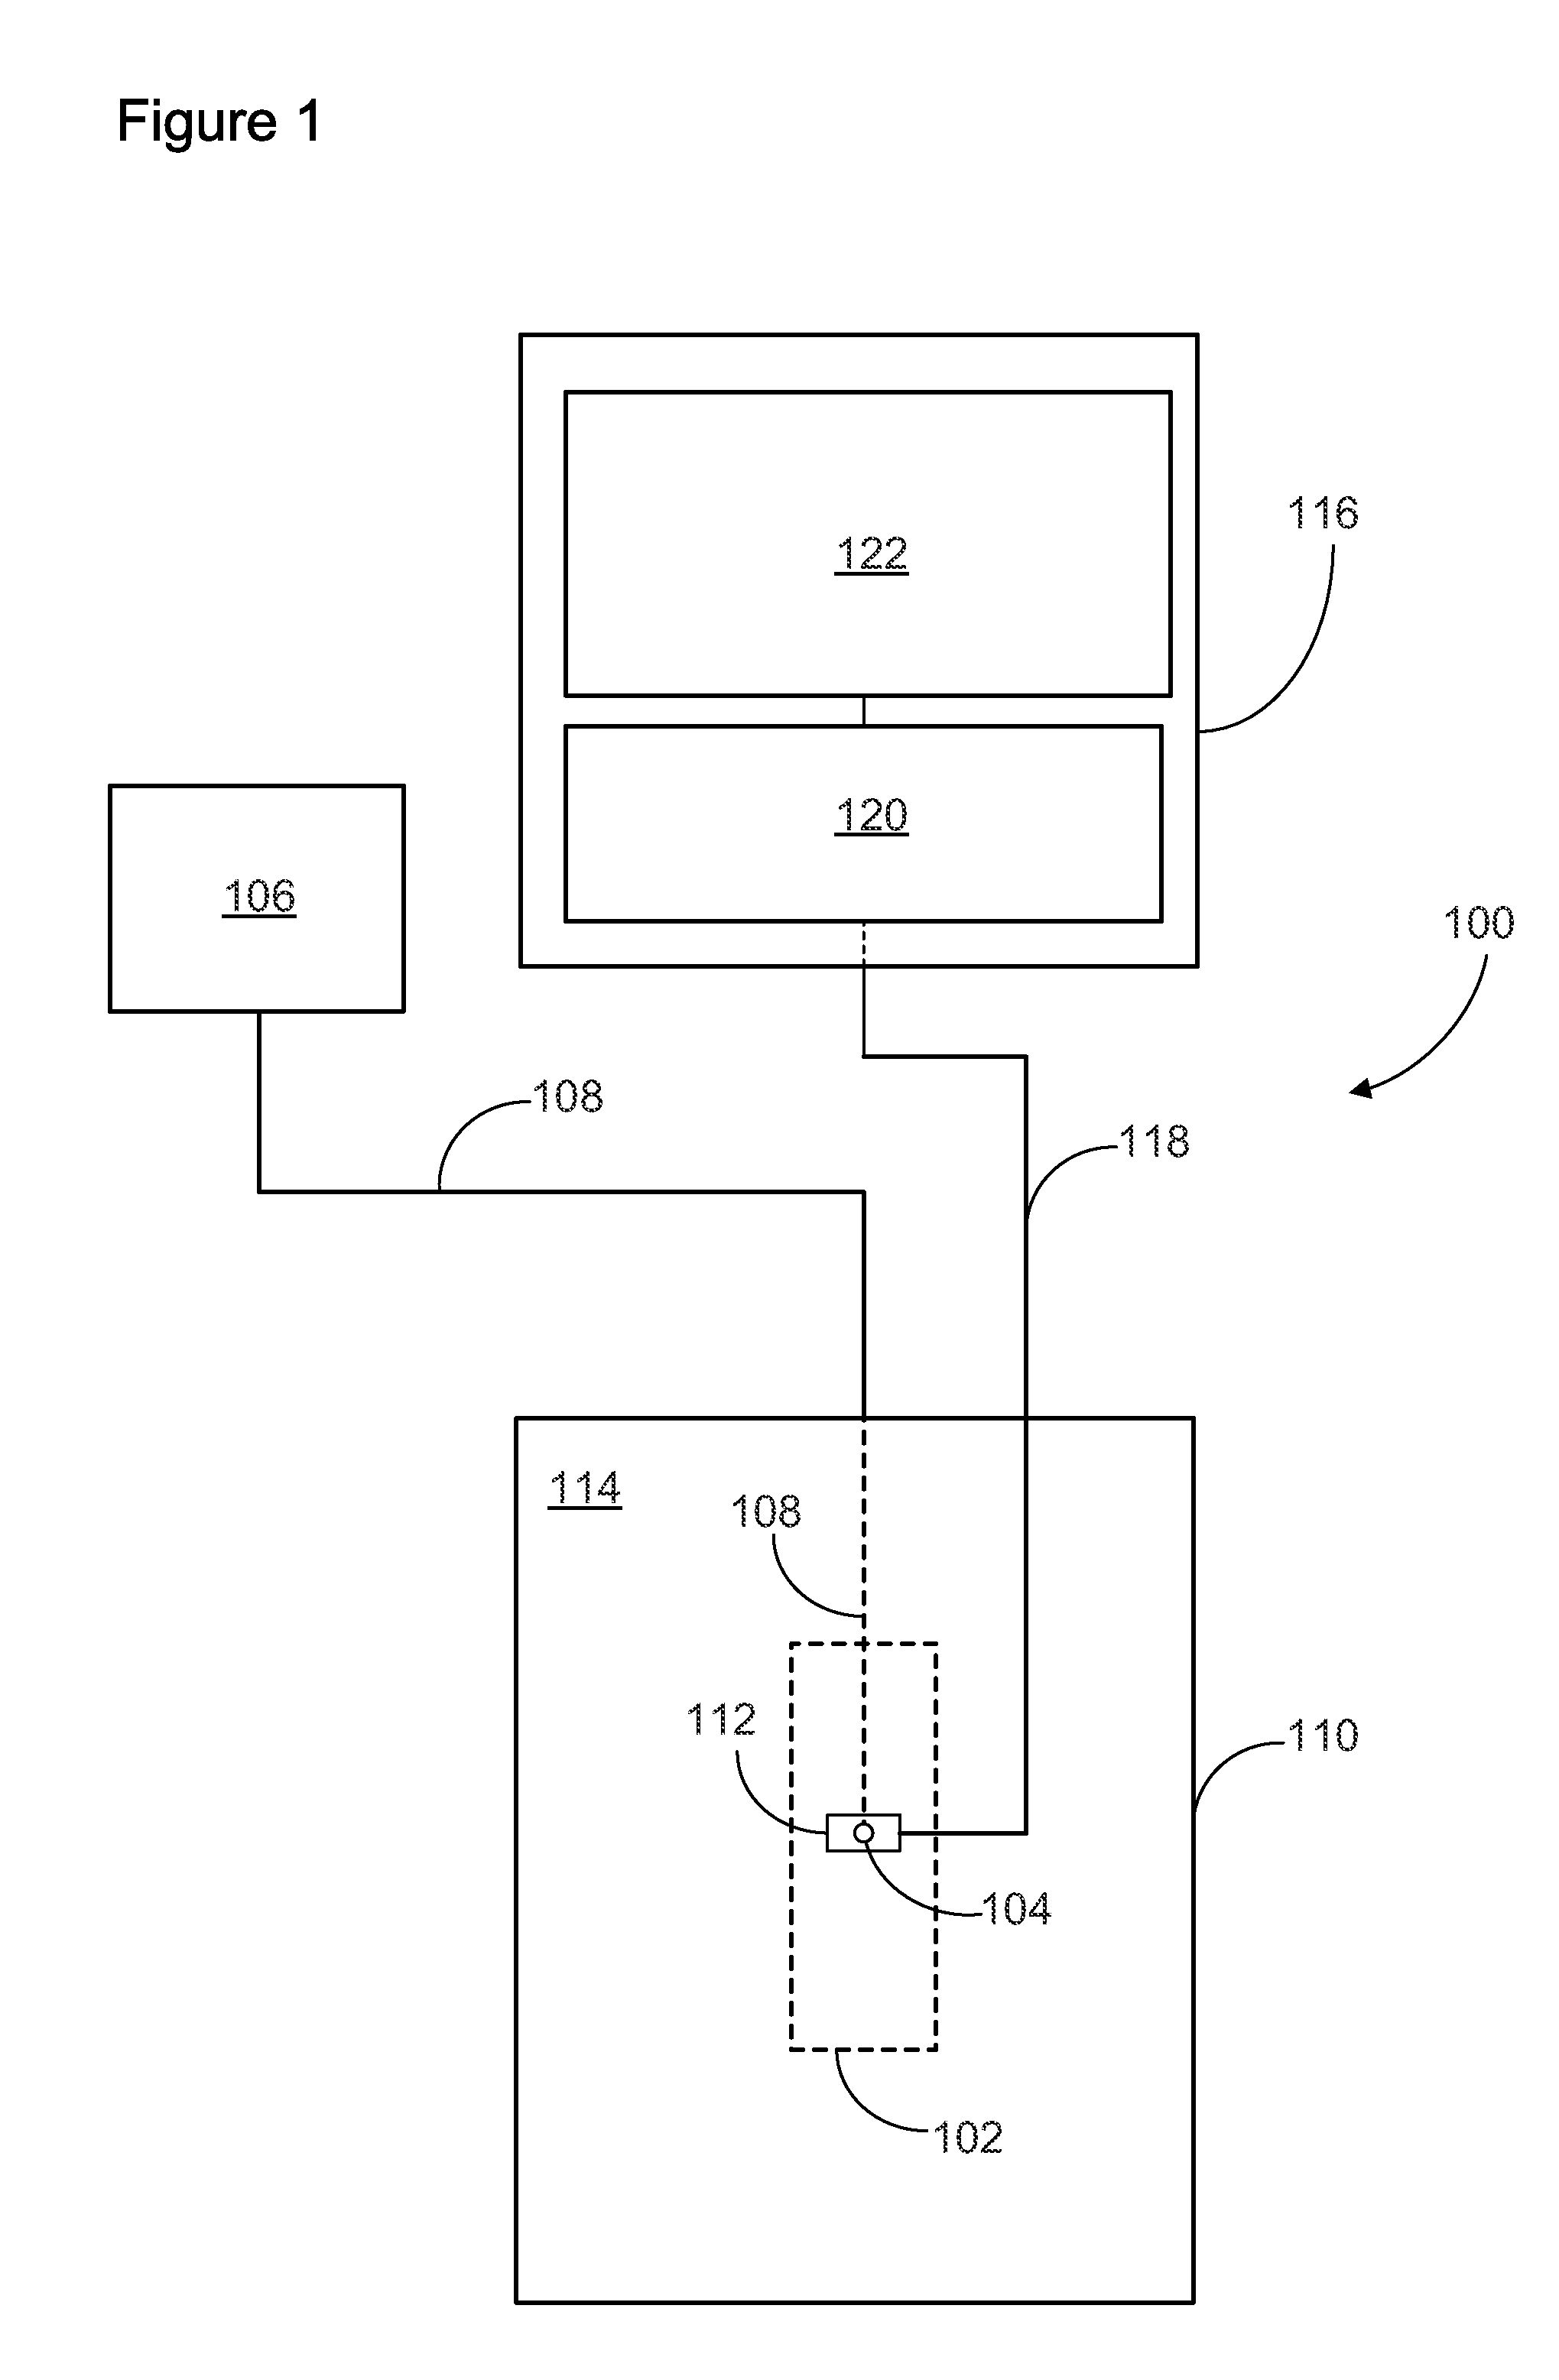 Methods and Apparatus for Optoacoustic Guidance and Confirmation of Placement of Indwelling Medical Apparatus